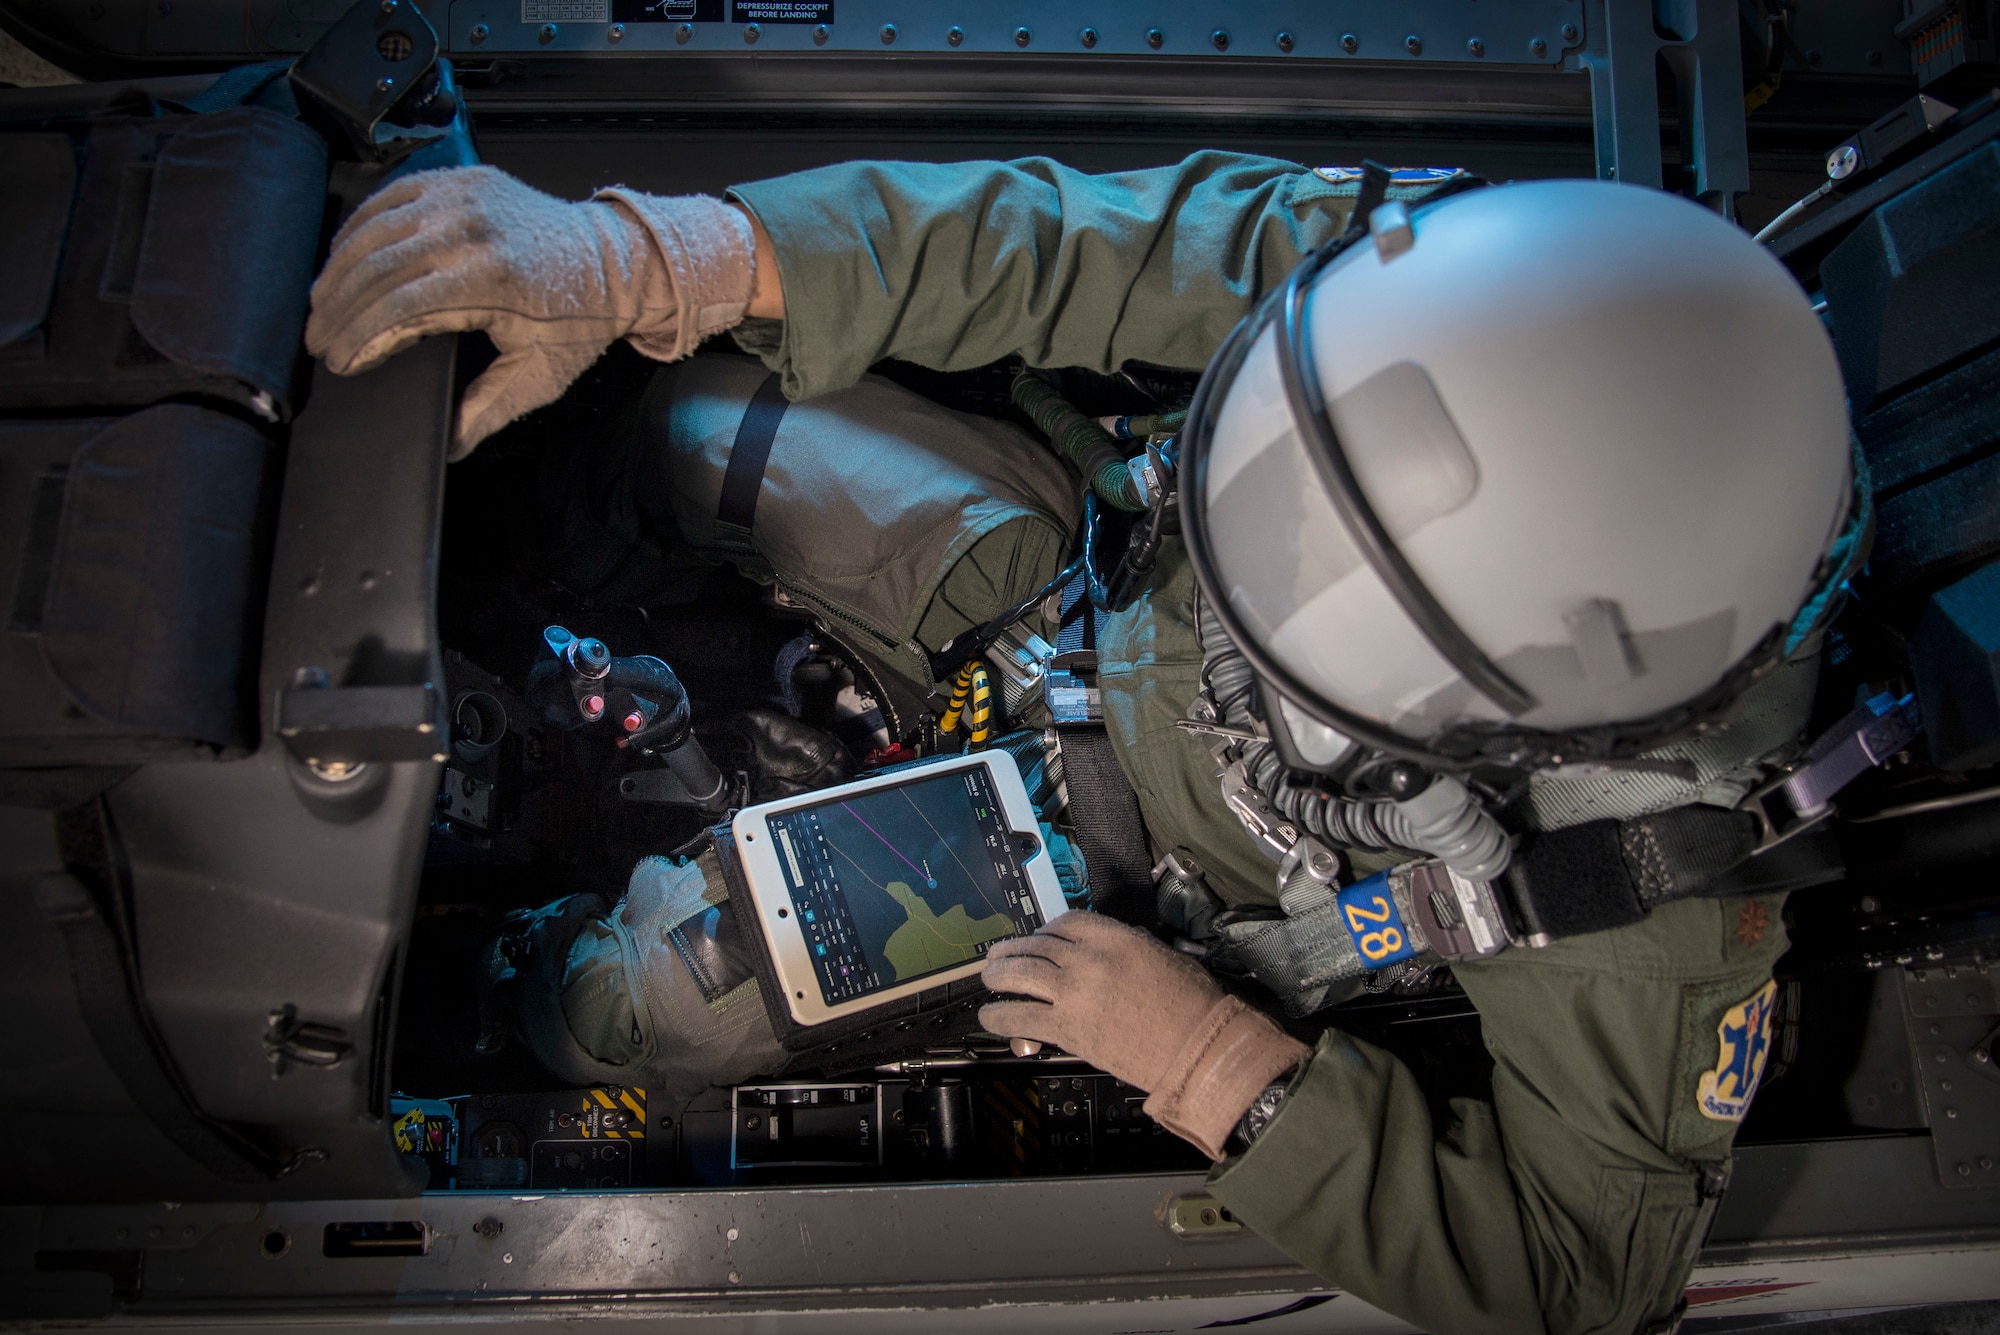 Aircrews throughout Air Education and Training Command will soon be benefiting from a test program spearheaded by Joint Base San Antonio-Randolph’s 12th Operations Group that will improve information management in the cockpit.